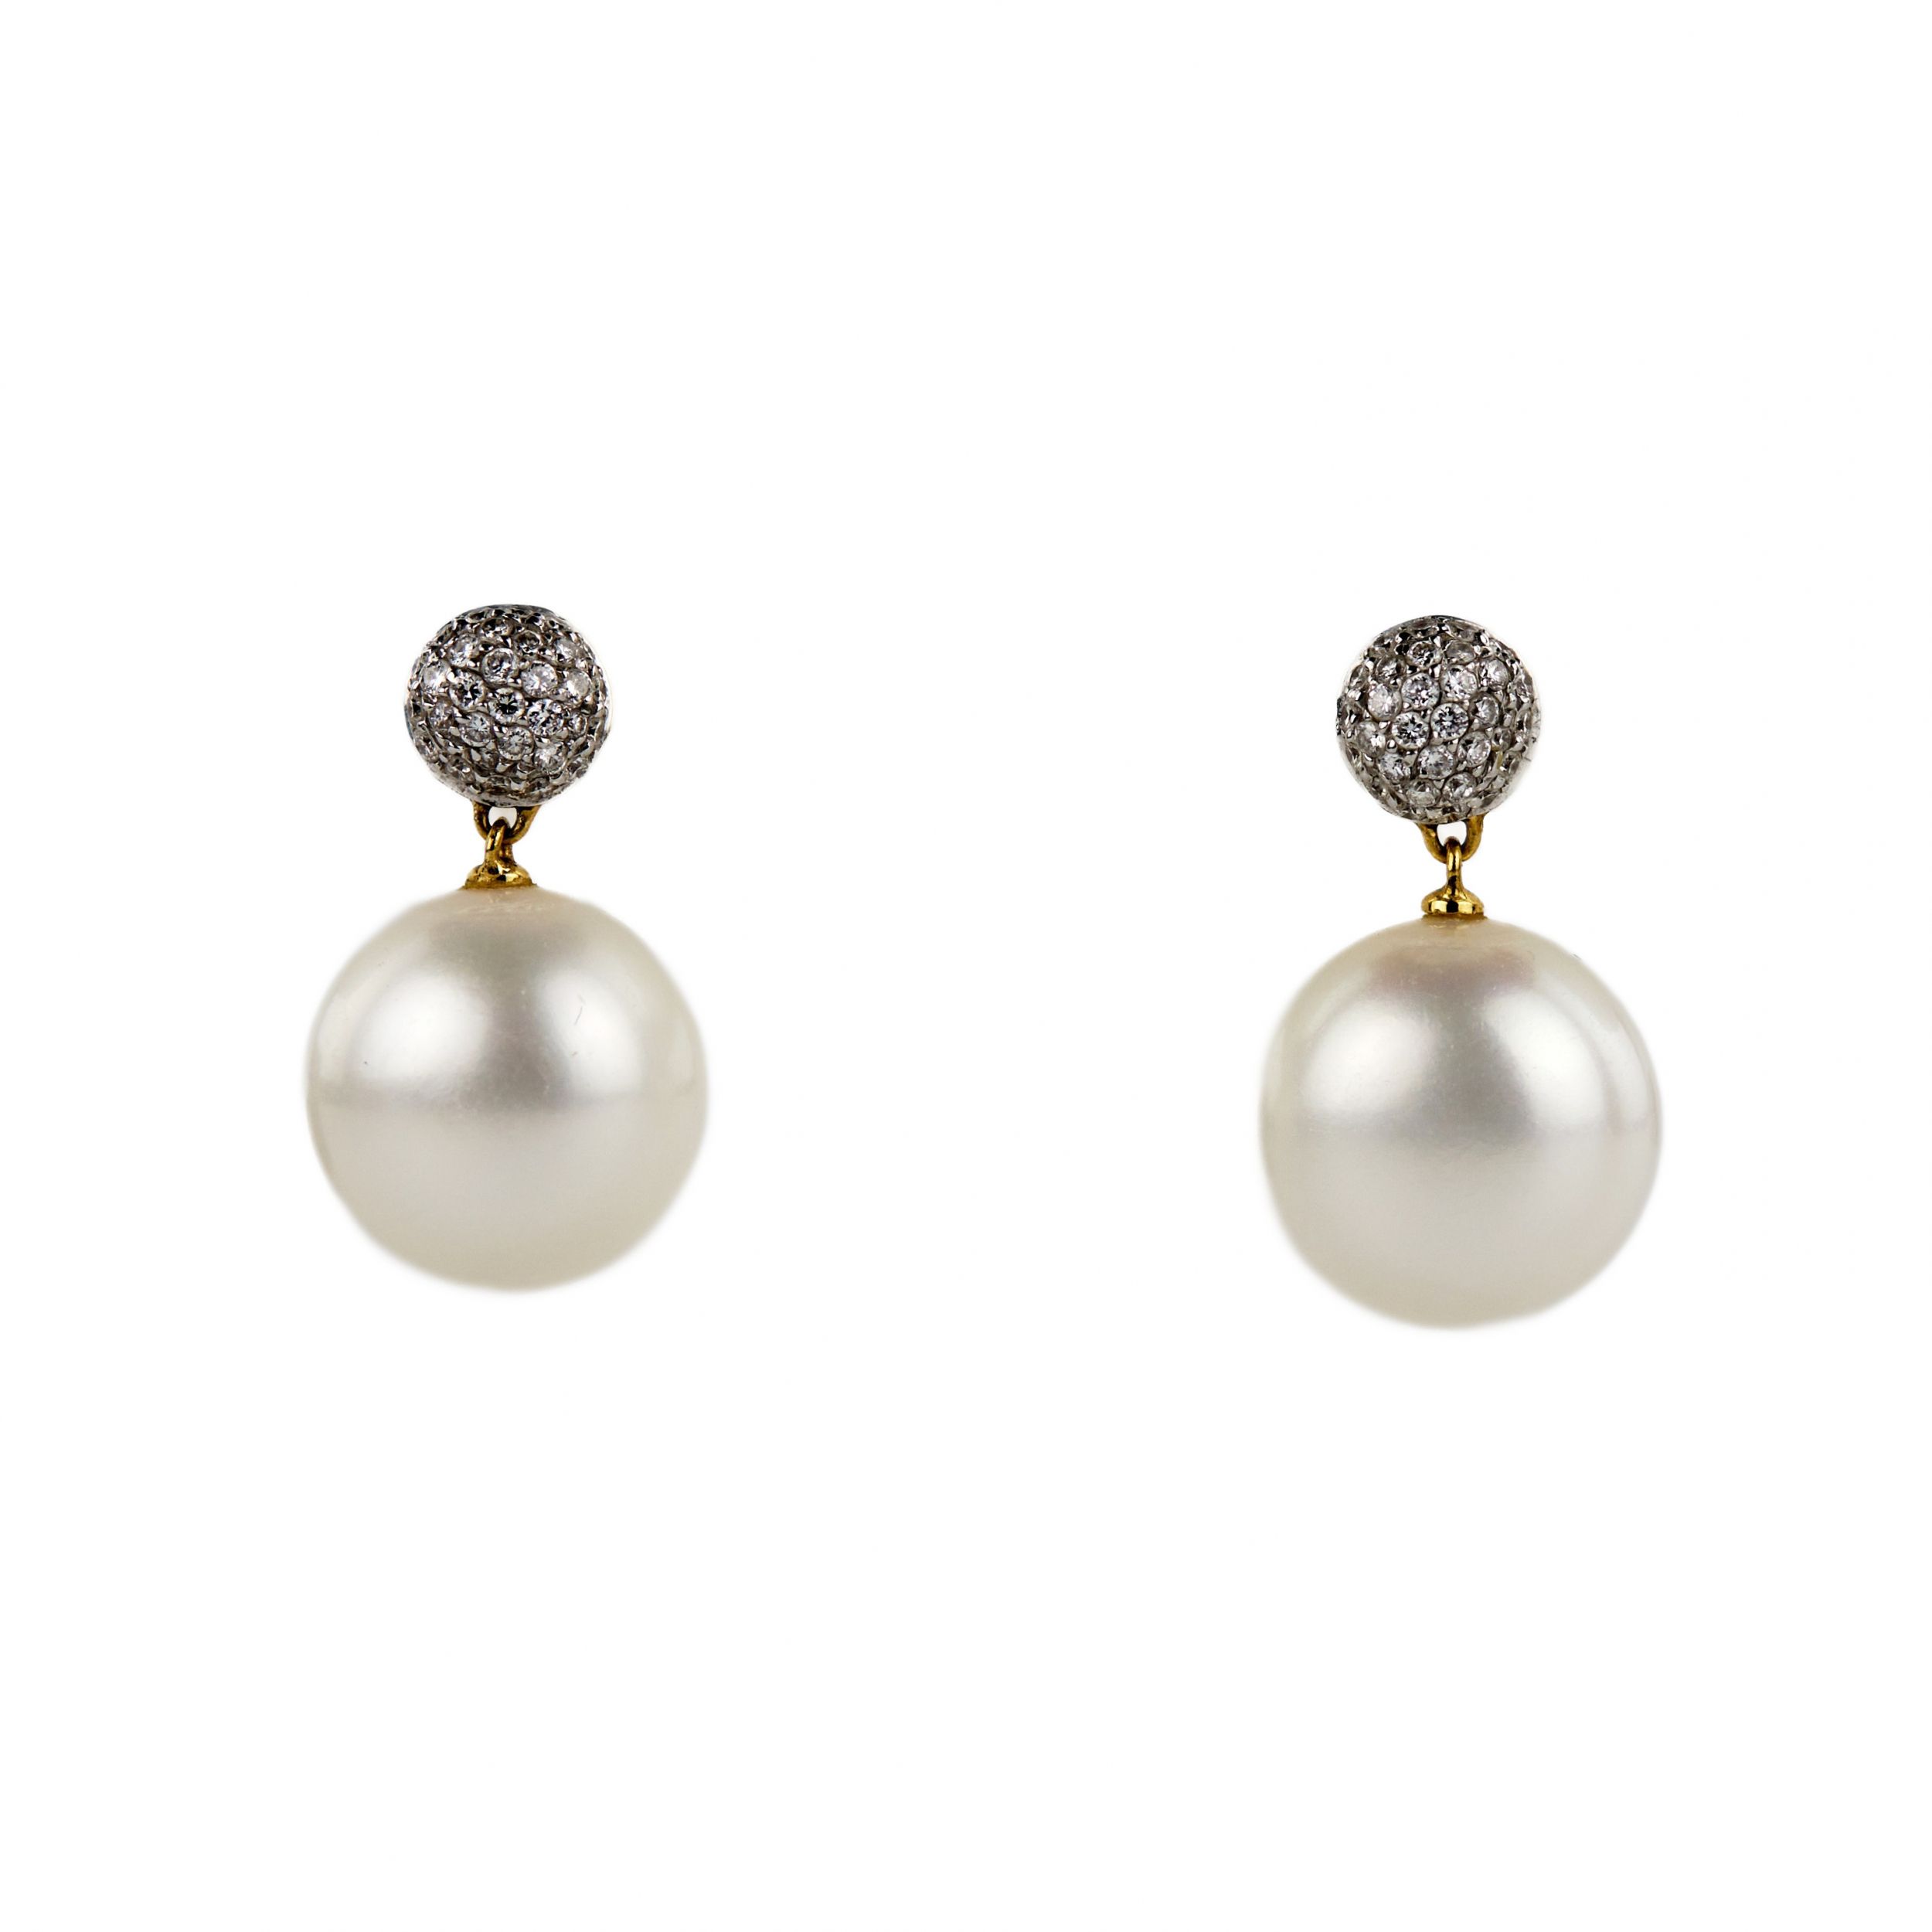 Marco-Bicego-Finely-crafted-gold-earrings-with-pearls-and-diamonds-